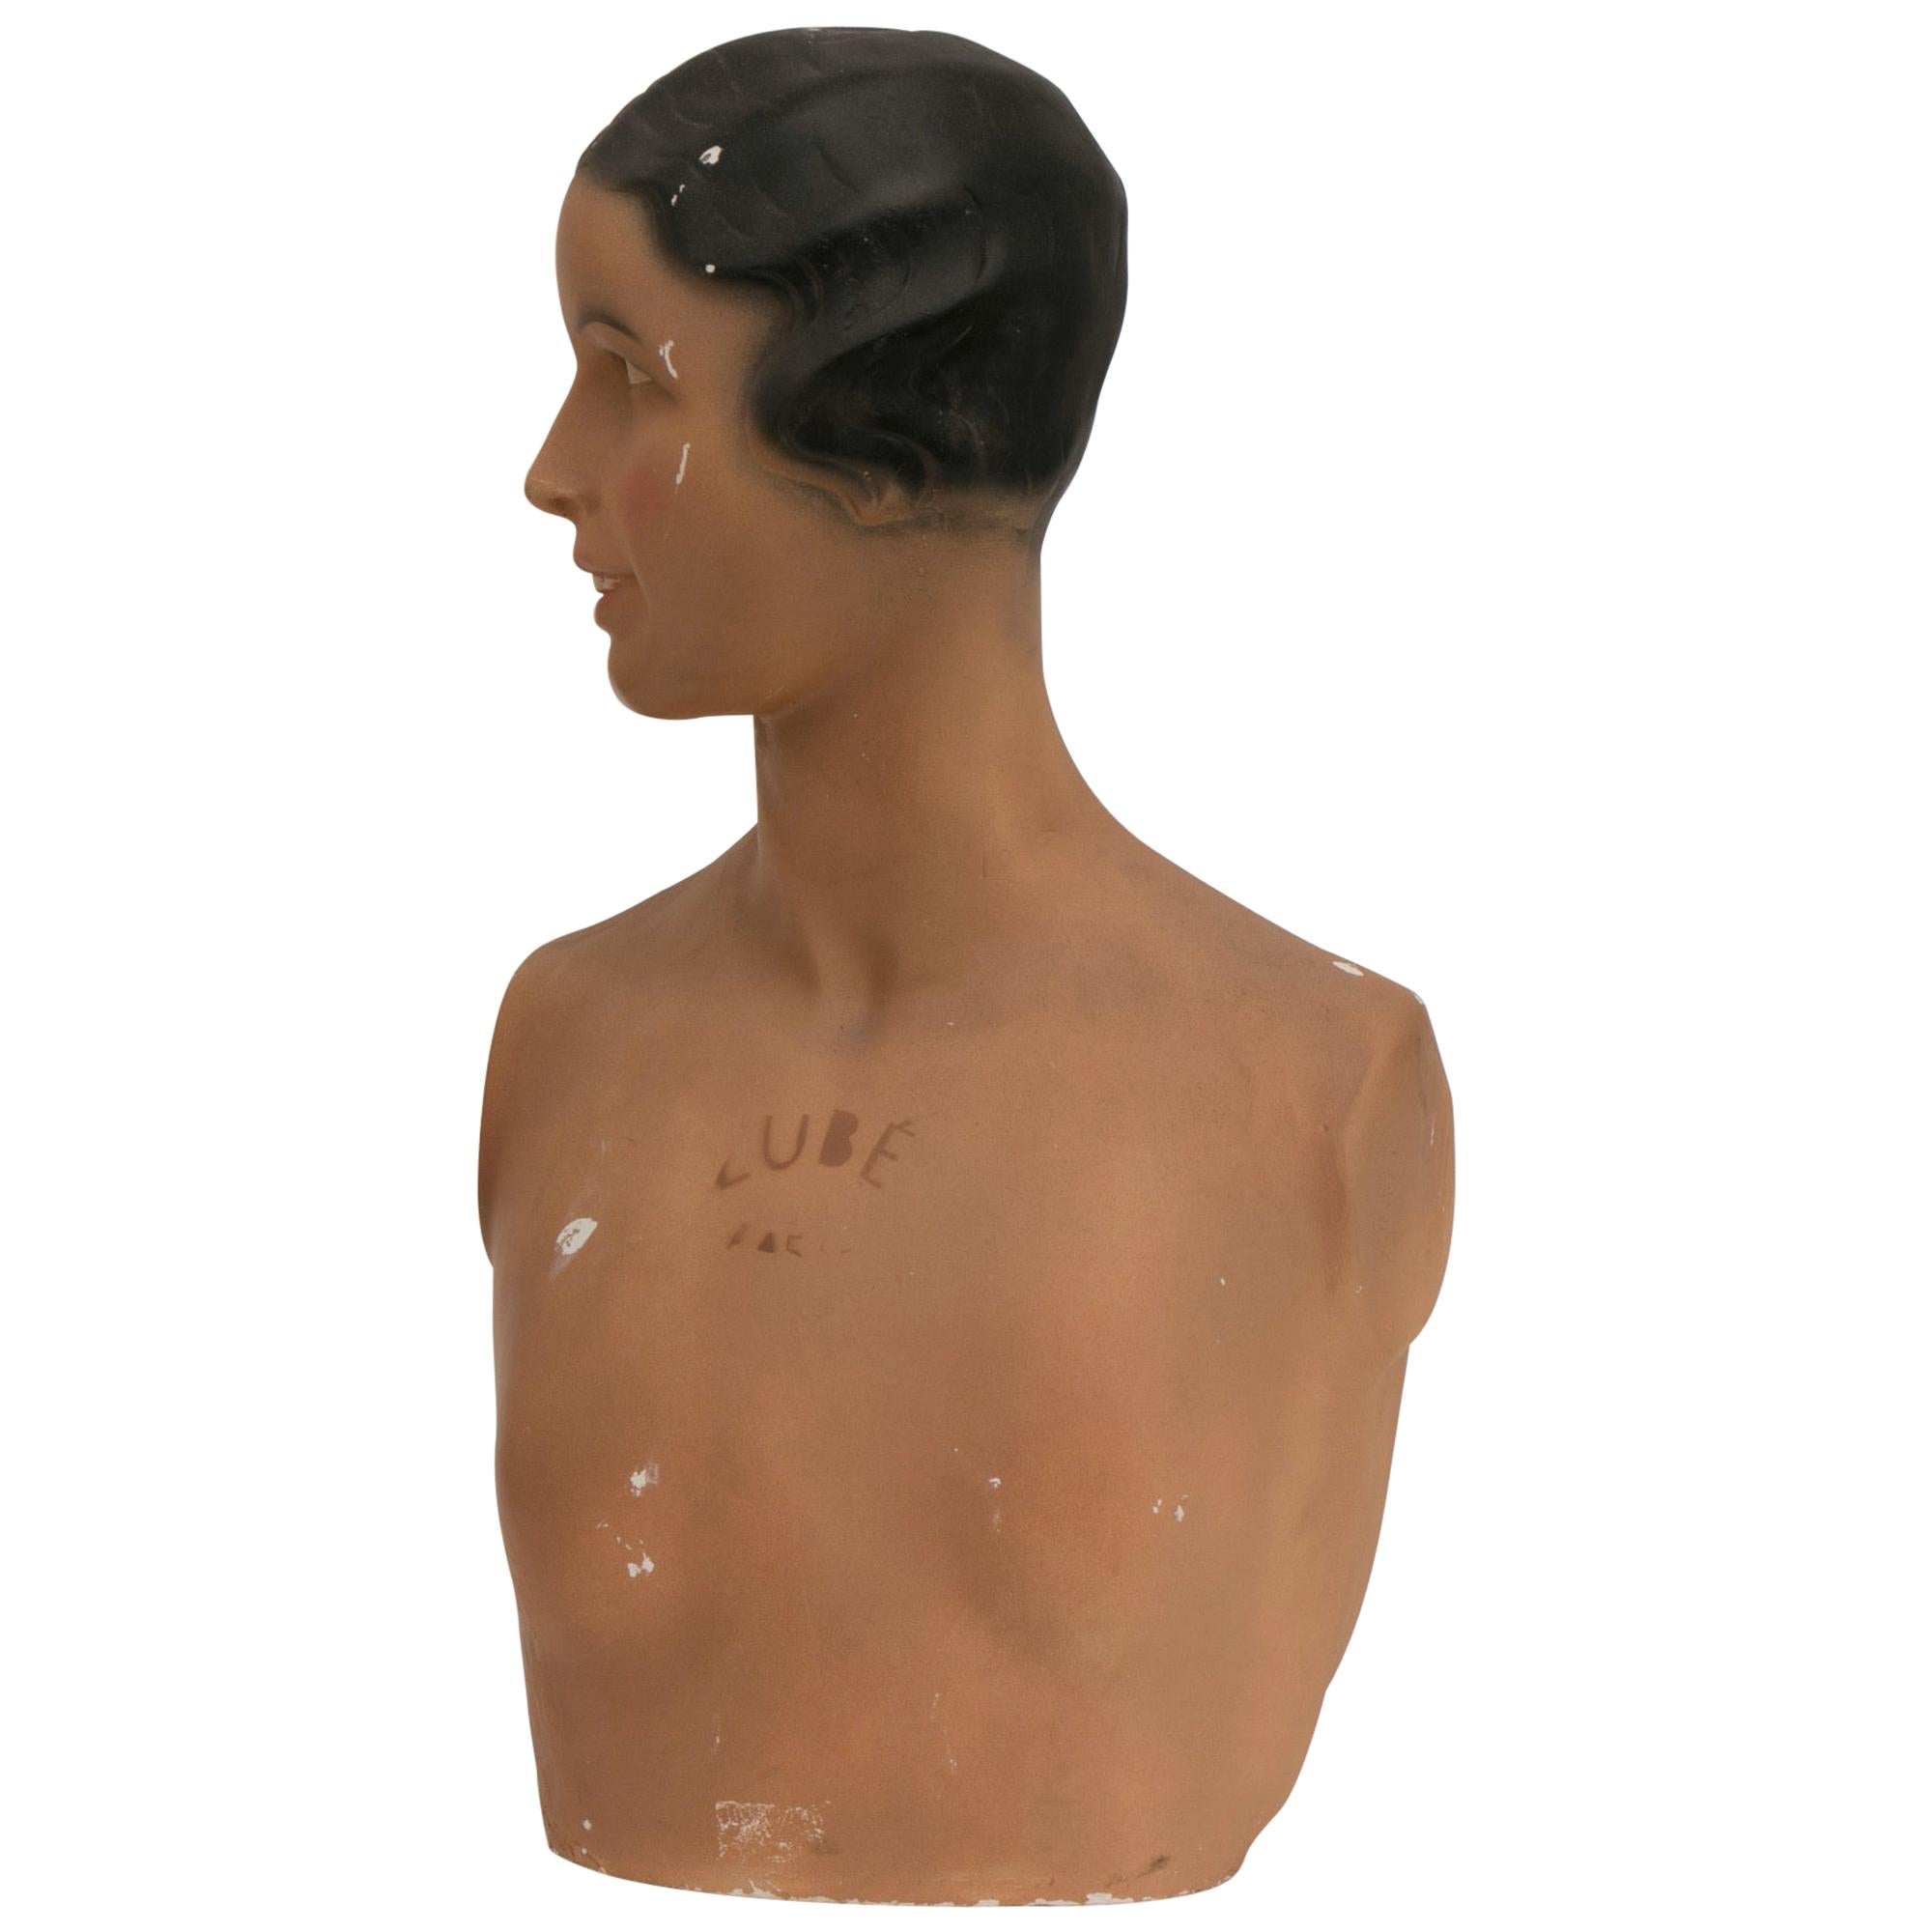 French Art Deco Shop Display Mannequin circa 1930 Lube Paris For Sale